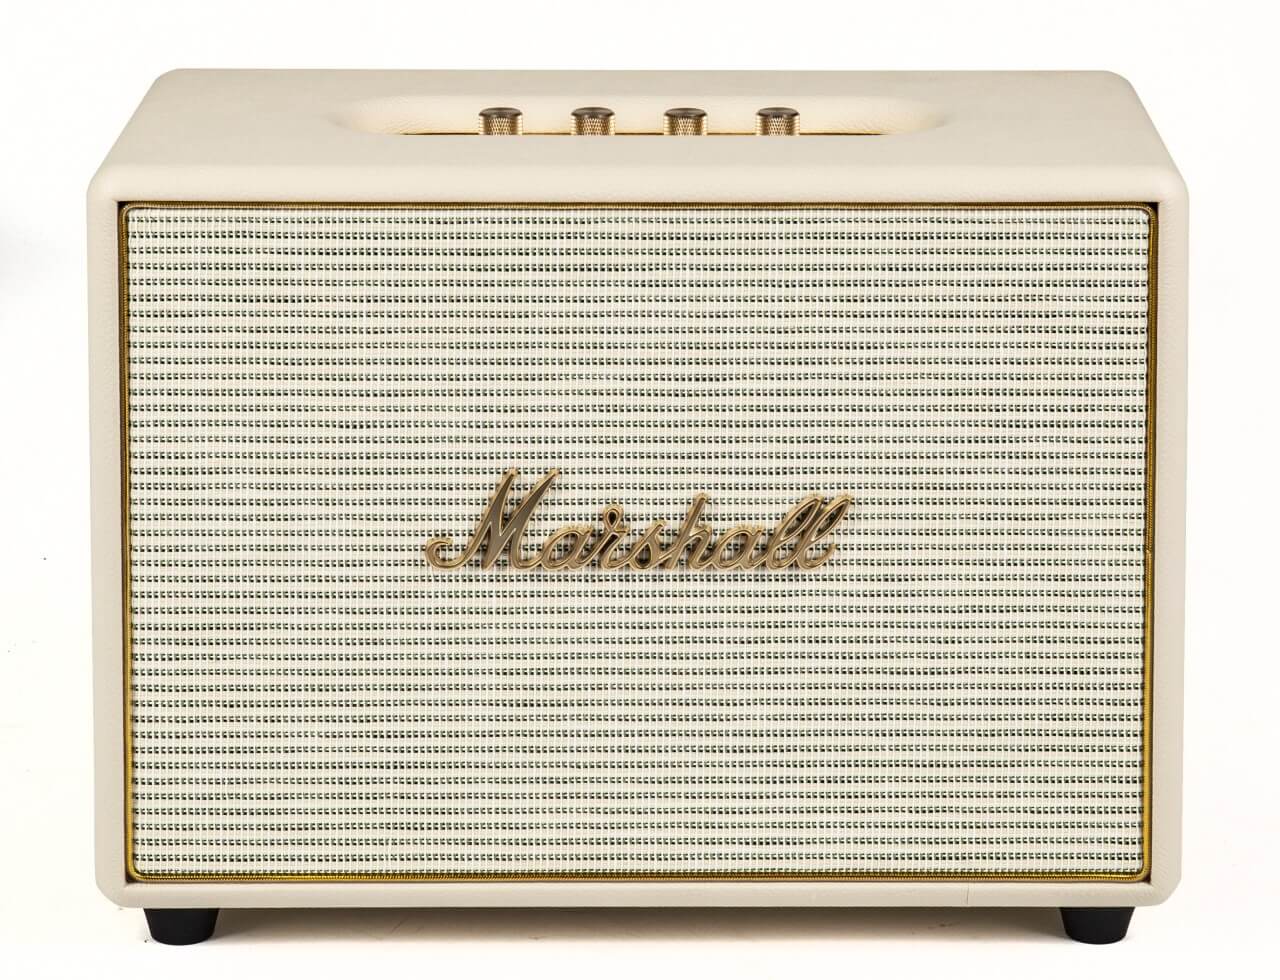 Marshall Woburn Multi-Room (Cream) favorable buying at our shop